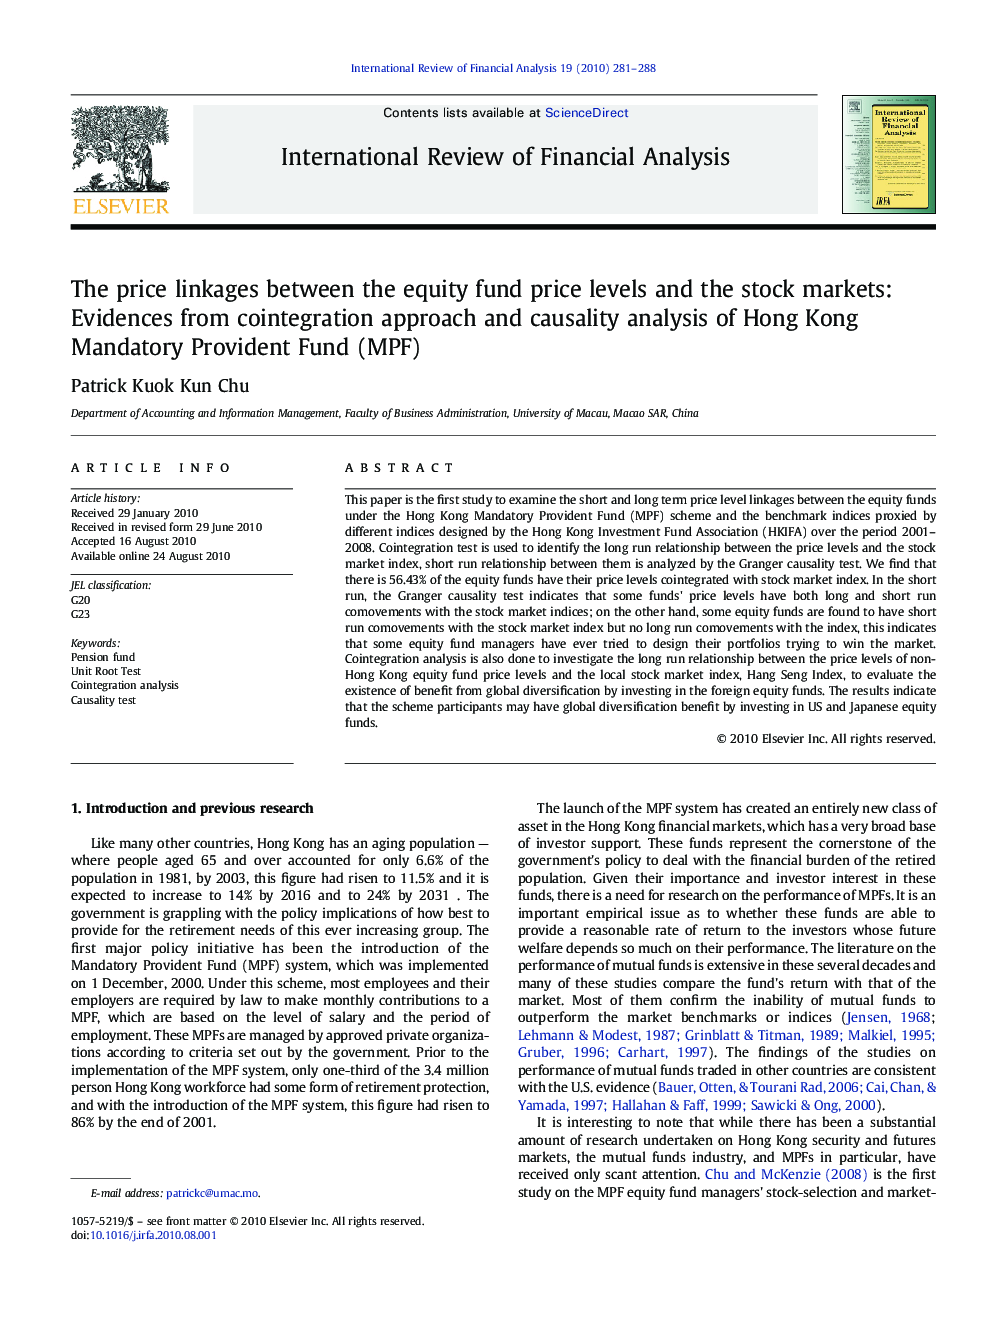 The price linkages between the equity fund price levels and the stock markets: Evidences from cointegration approach and causality analysis of Hong Kong Mandatory Provident Fund (MPF)